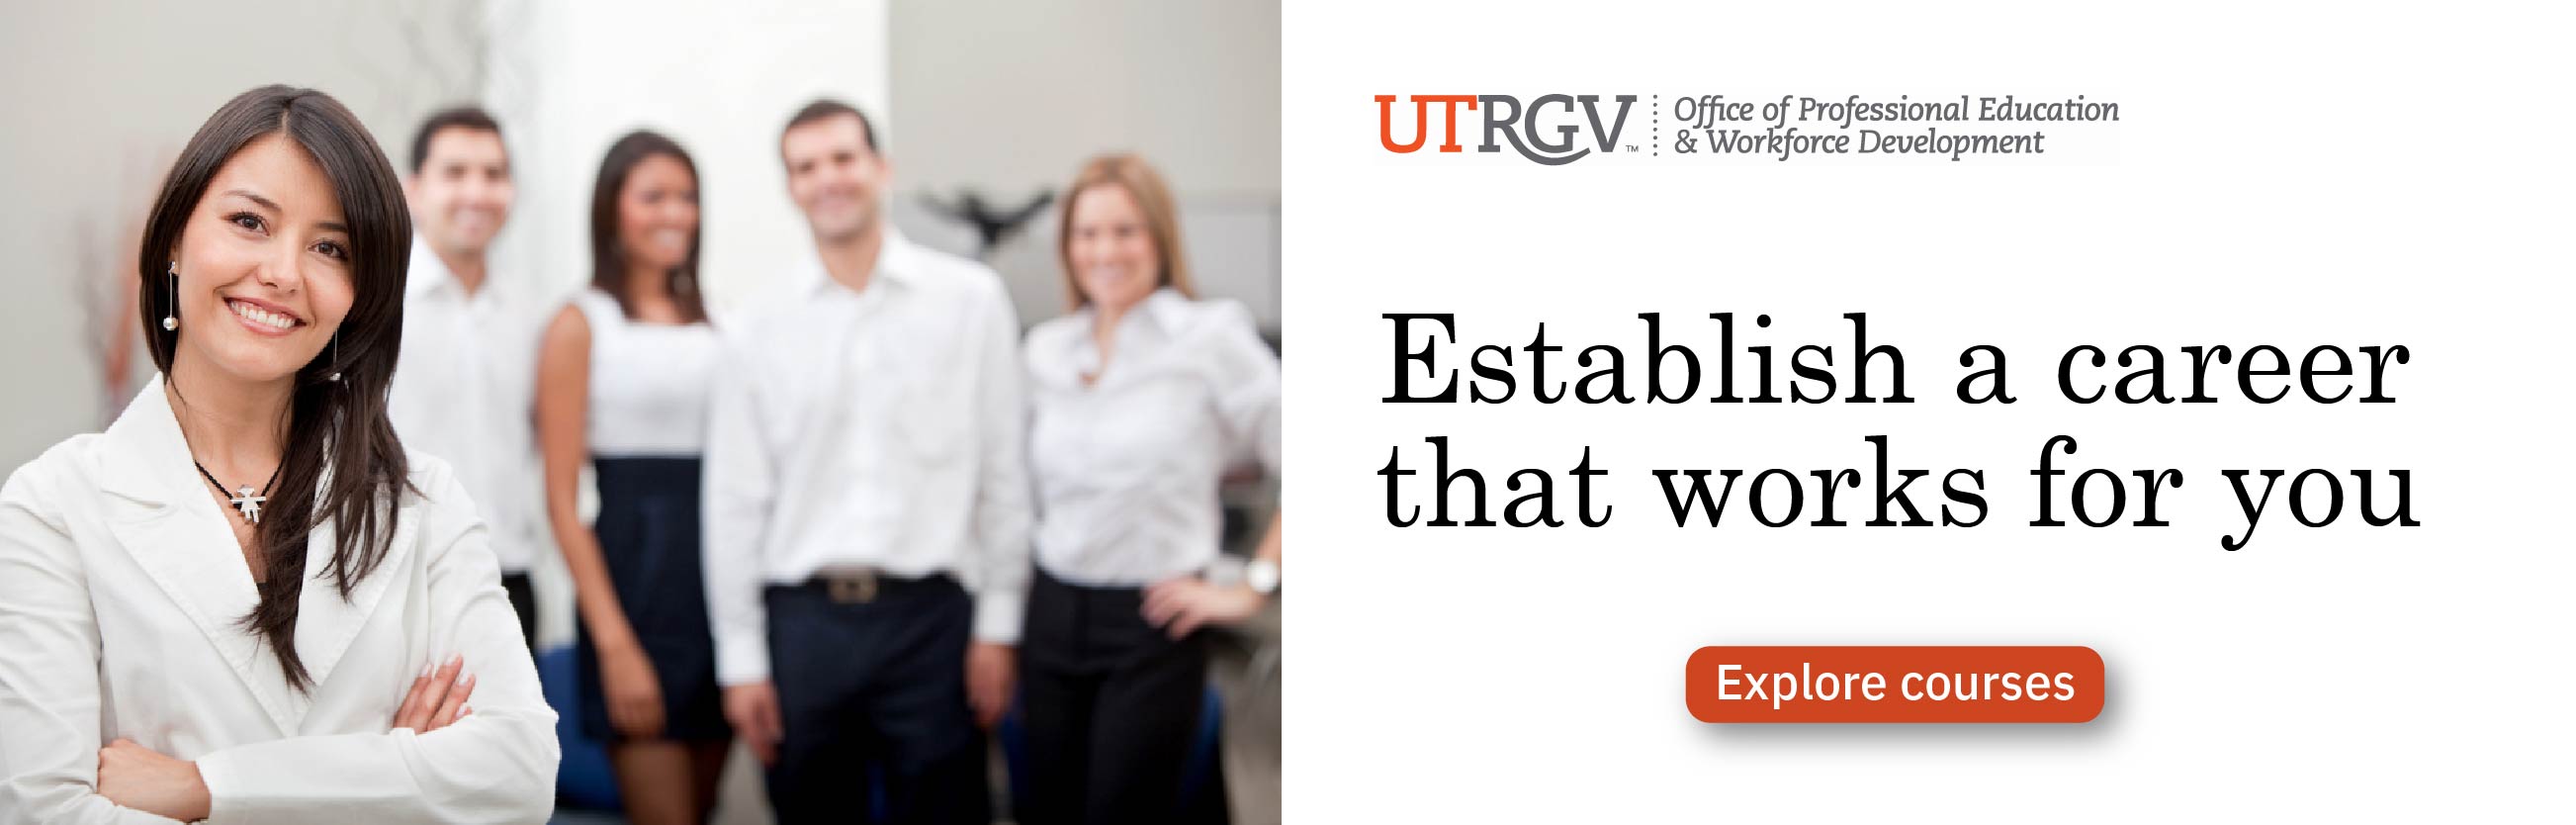 UTRGV Office of Professional Education and Workforce Development helps you establish a career that works for you. Explore courses.